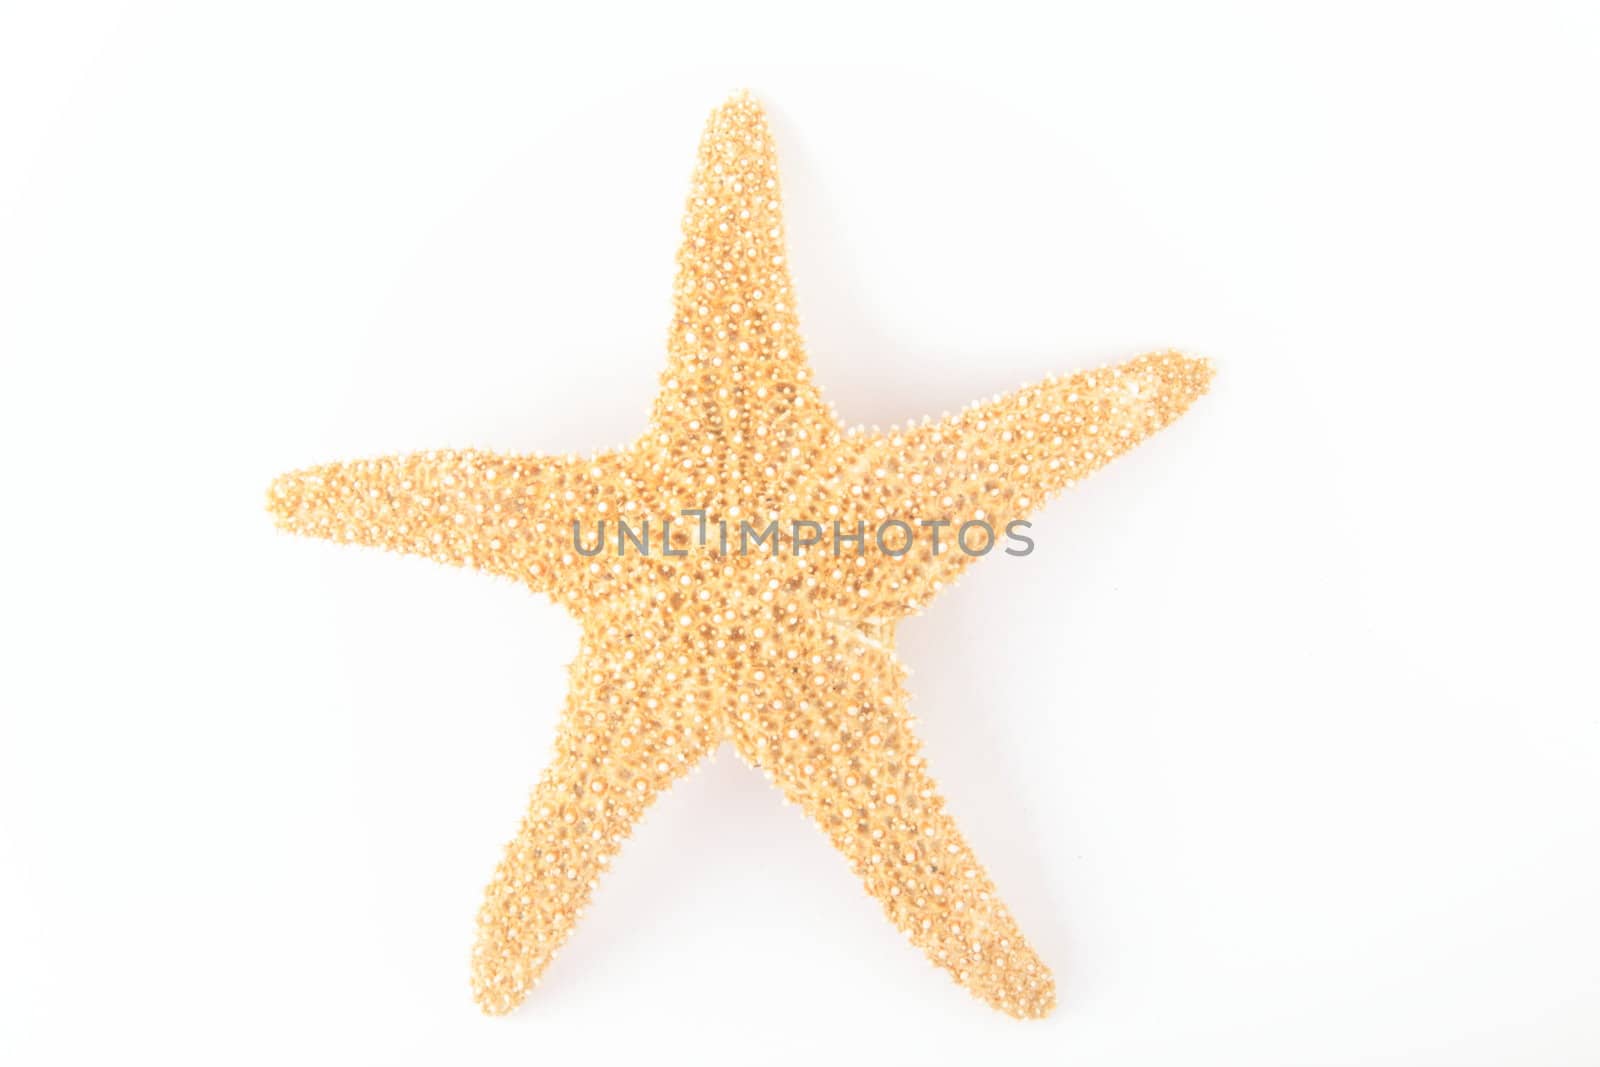 Starfish from oceans isolated on white background